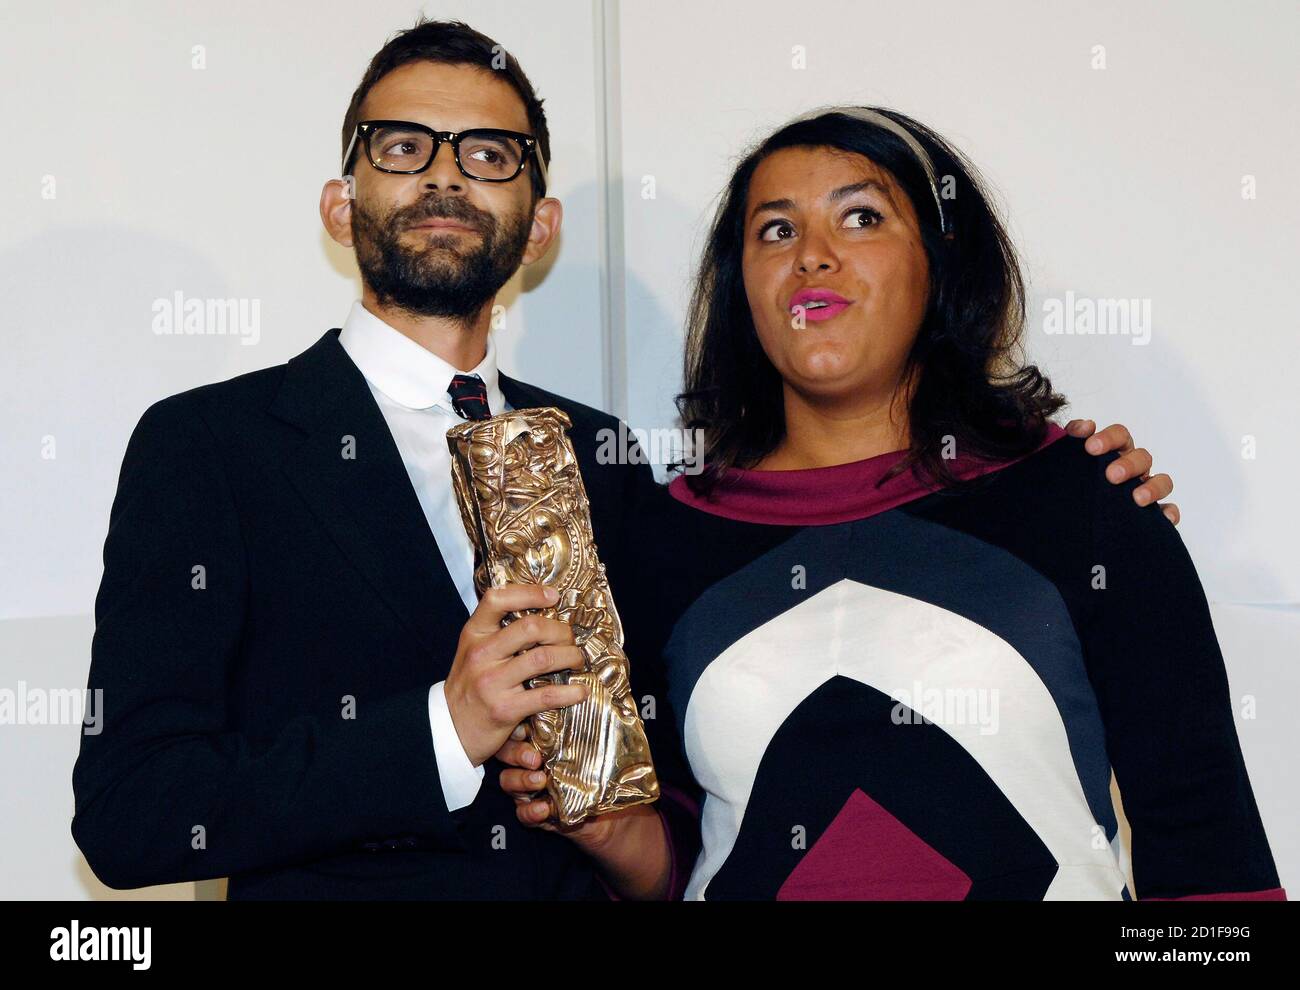 French directors Marjane Satrapi (R) and Vincent Paronnaud pose with their award for best debut film for 'Persepolis' at the French Cesar ceremony in Paris February 22, 2008. REUTERS/Gonzalo Fuentes (FRANCE) Stock Photo